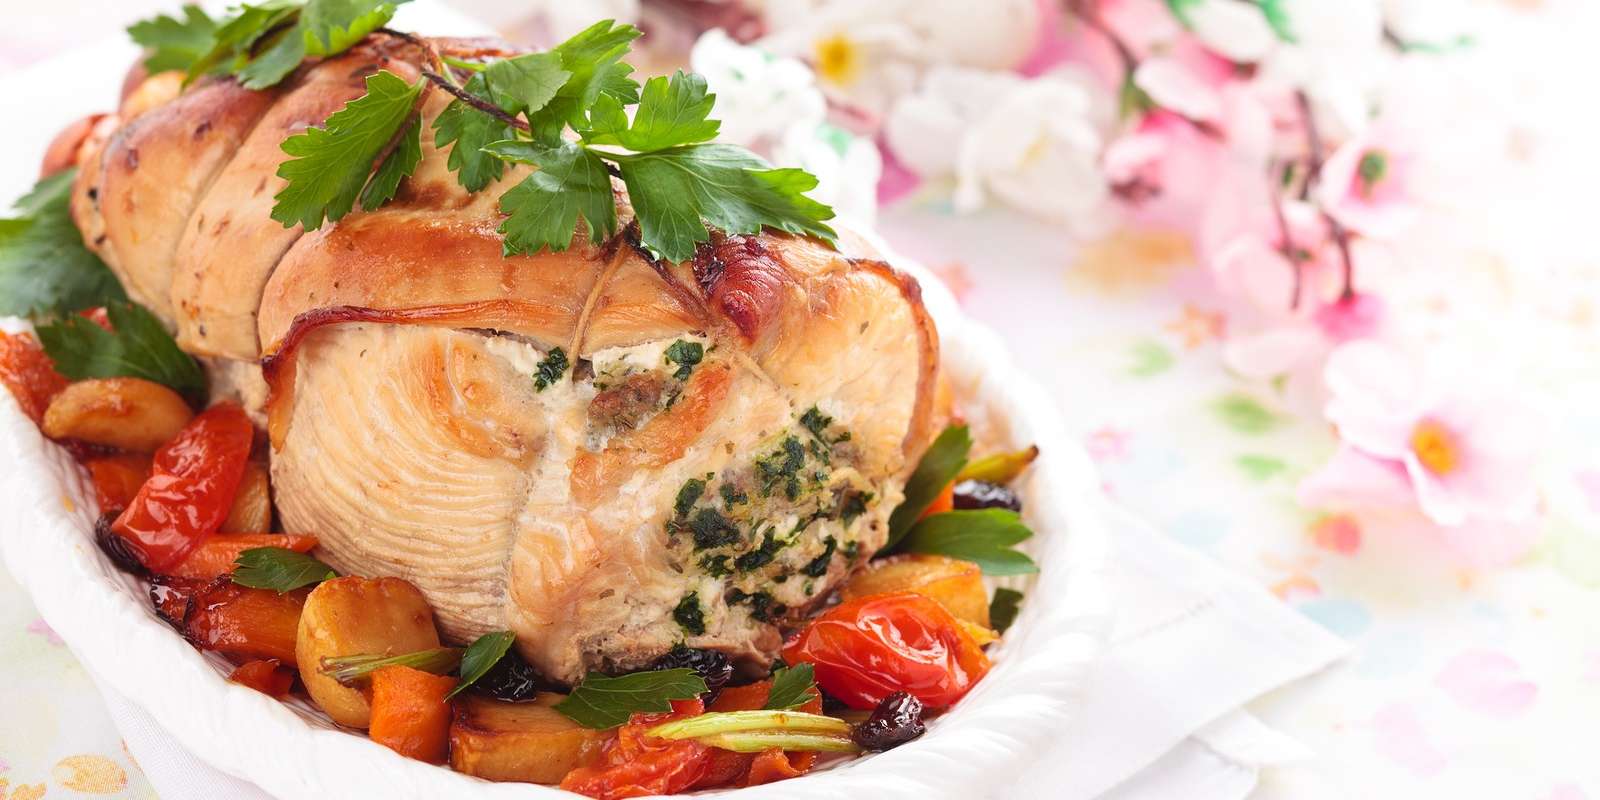 Roast Turkey with Bacon, Apple and Cranberries